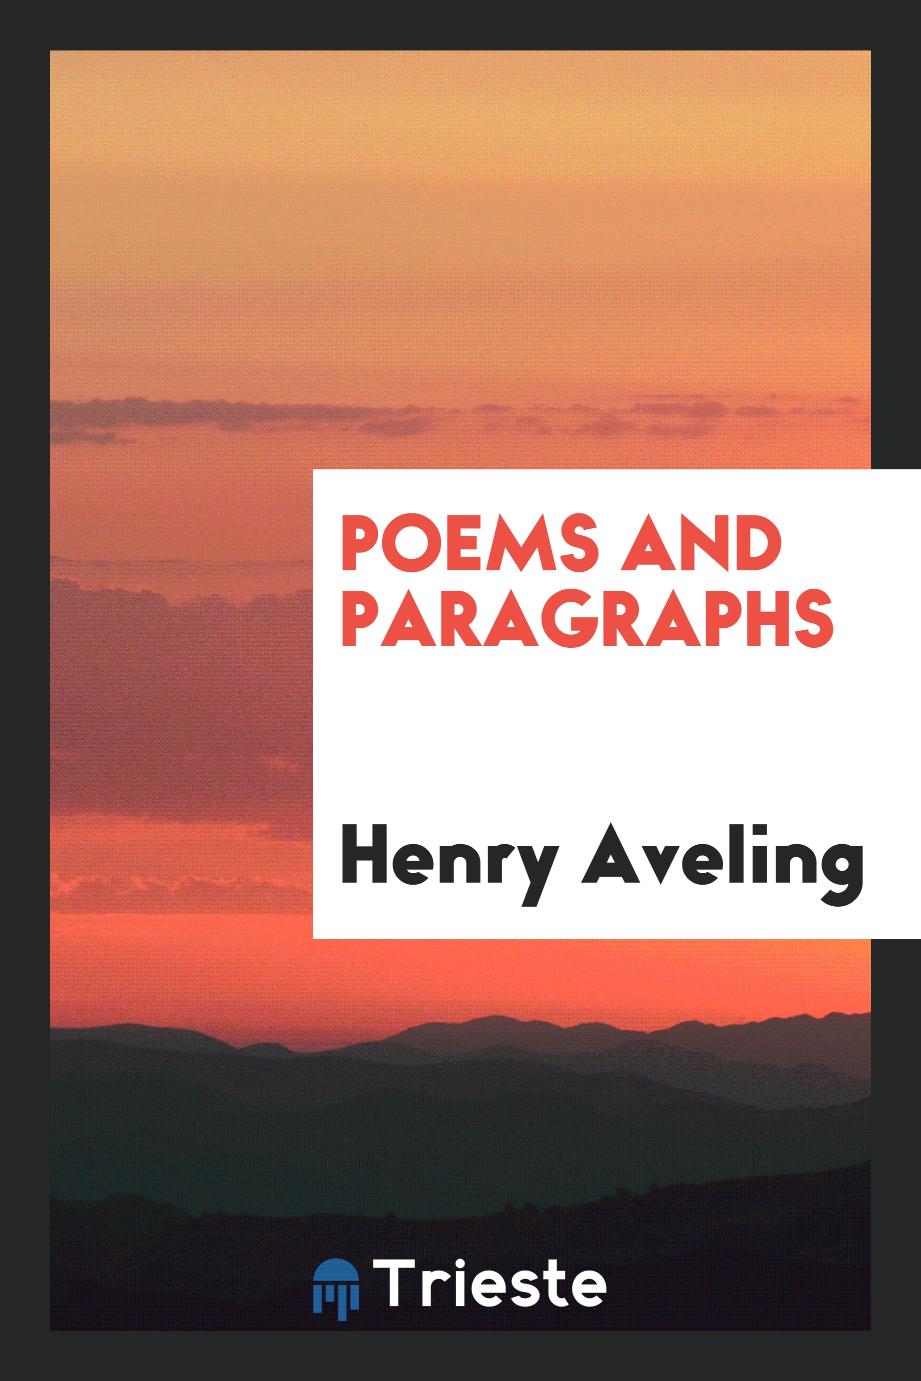 Poems and paragraphs